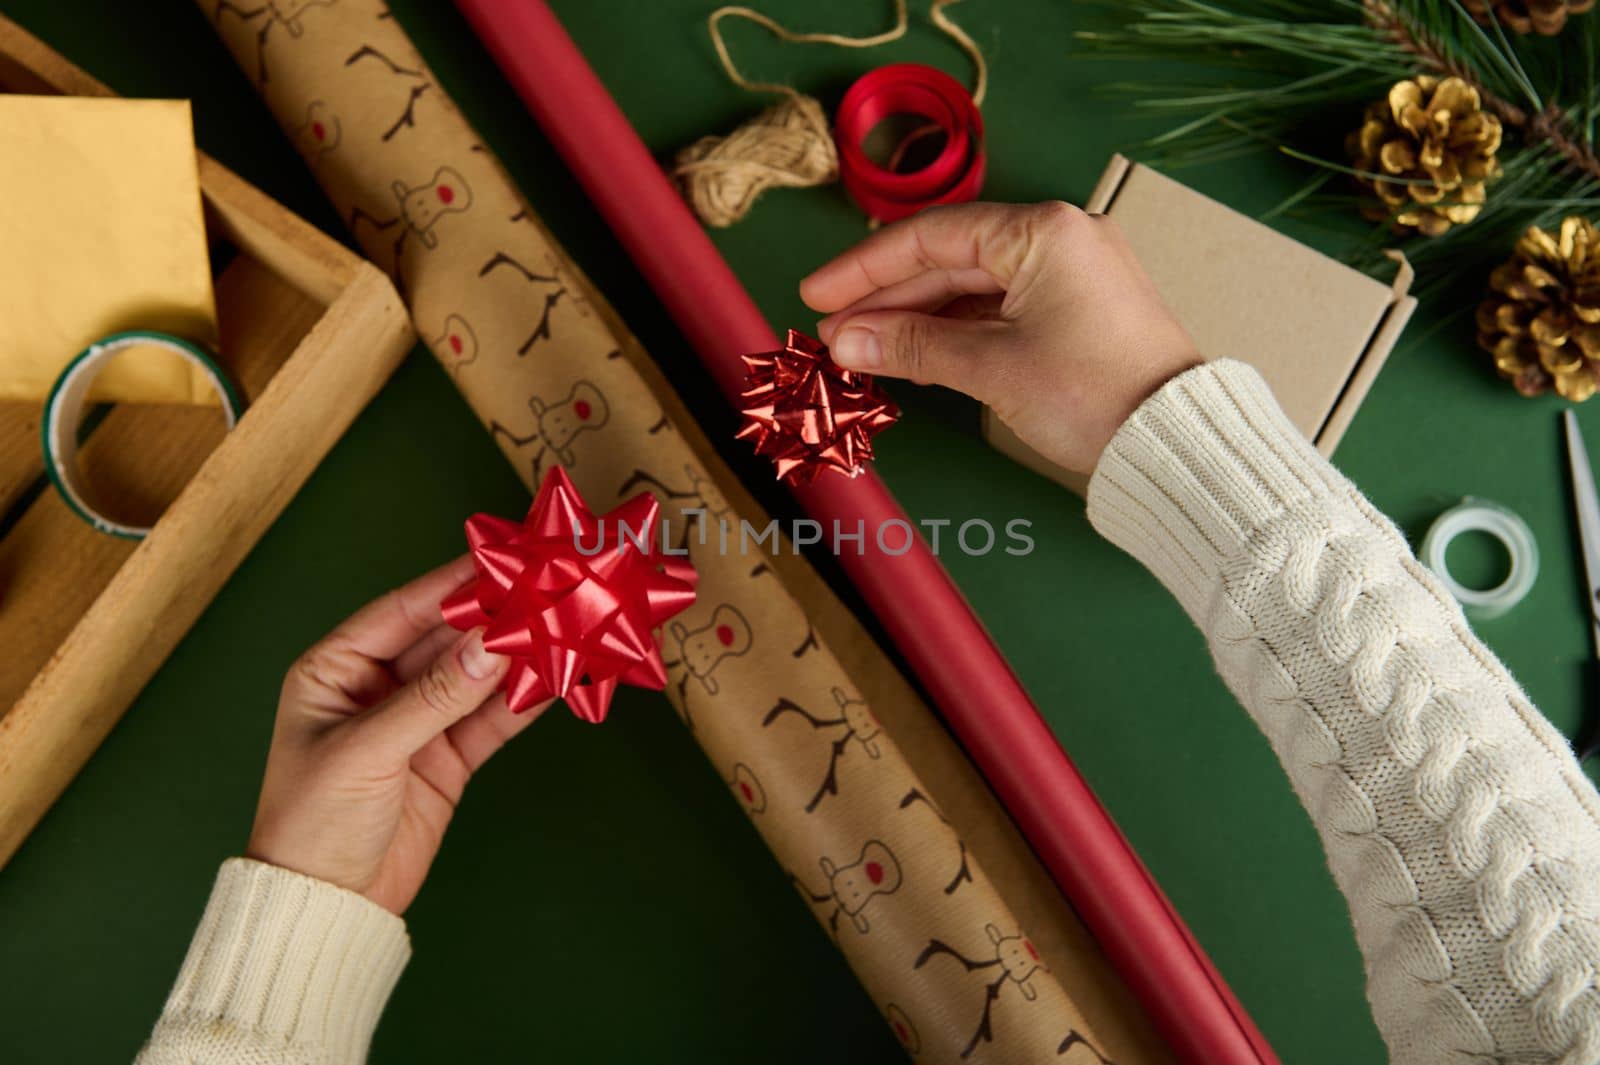 Top view woman's hands apply tied bows on wrapping paper with deer pattern and of red color, on a green surface with materials for packing Christmas and New Year gifts. Boxing Day. Handwork art. Diy